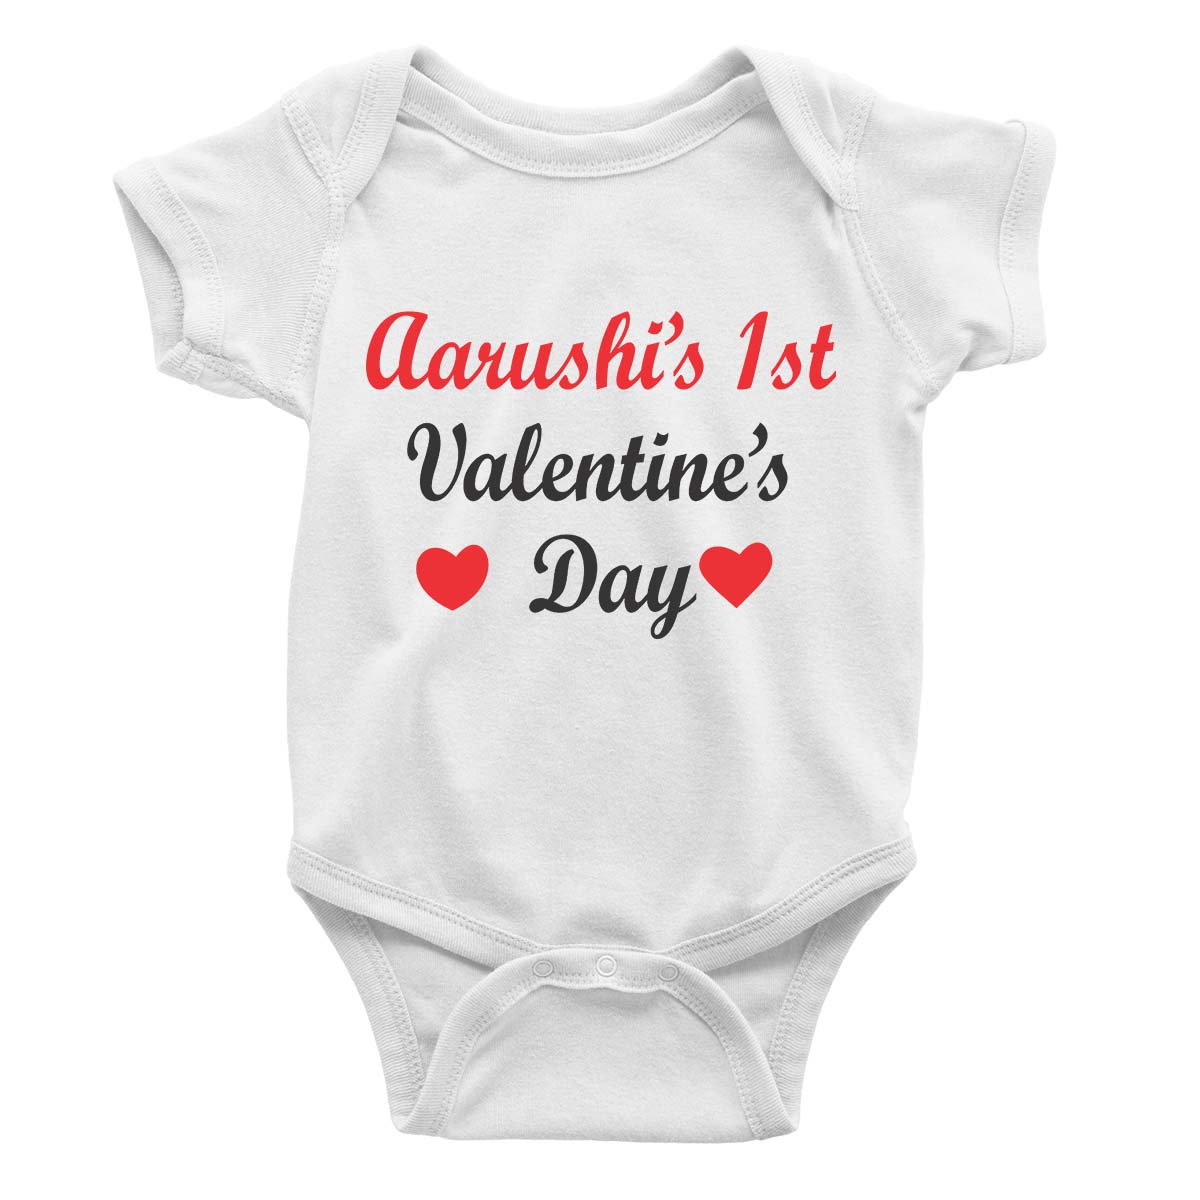 Aarushi 1st valentine's day white